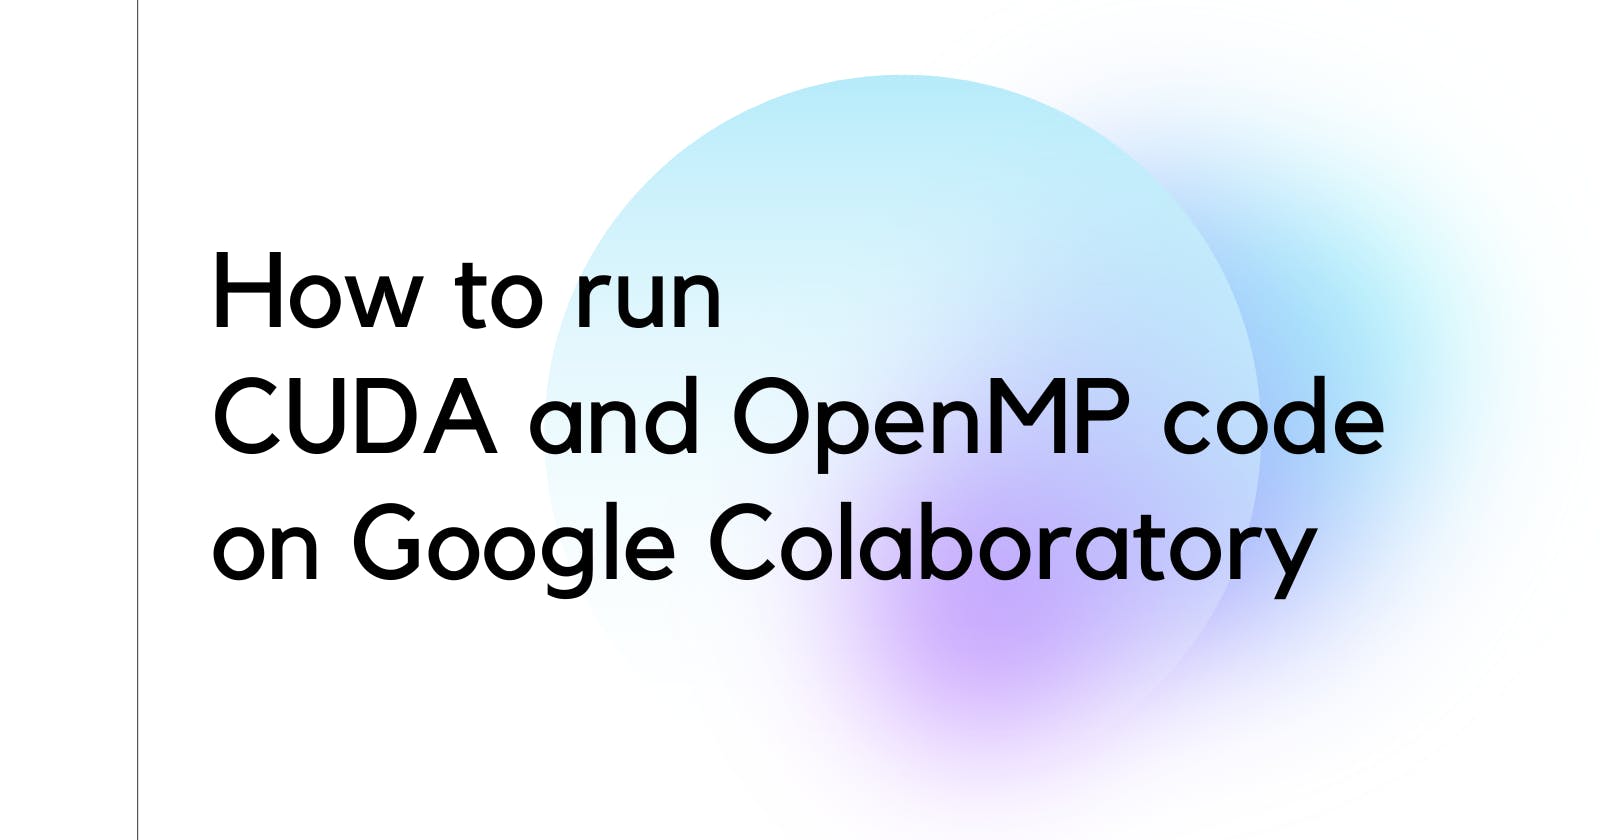 How to run CUDA and OpenMP code on Google Colaboratory